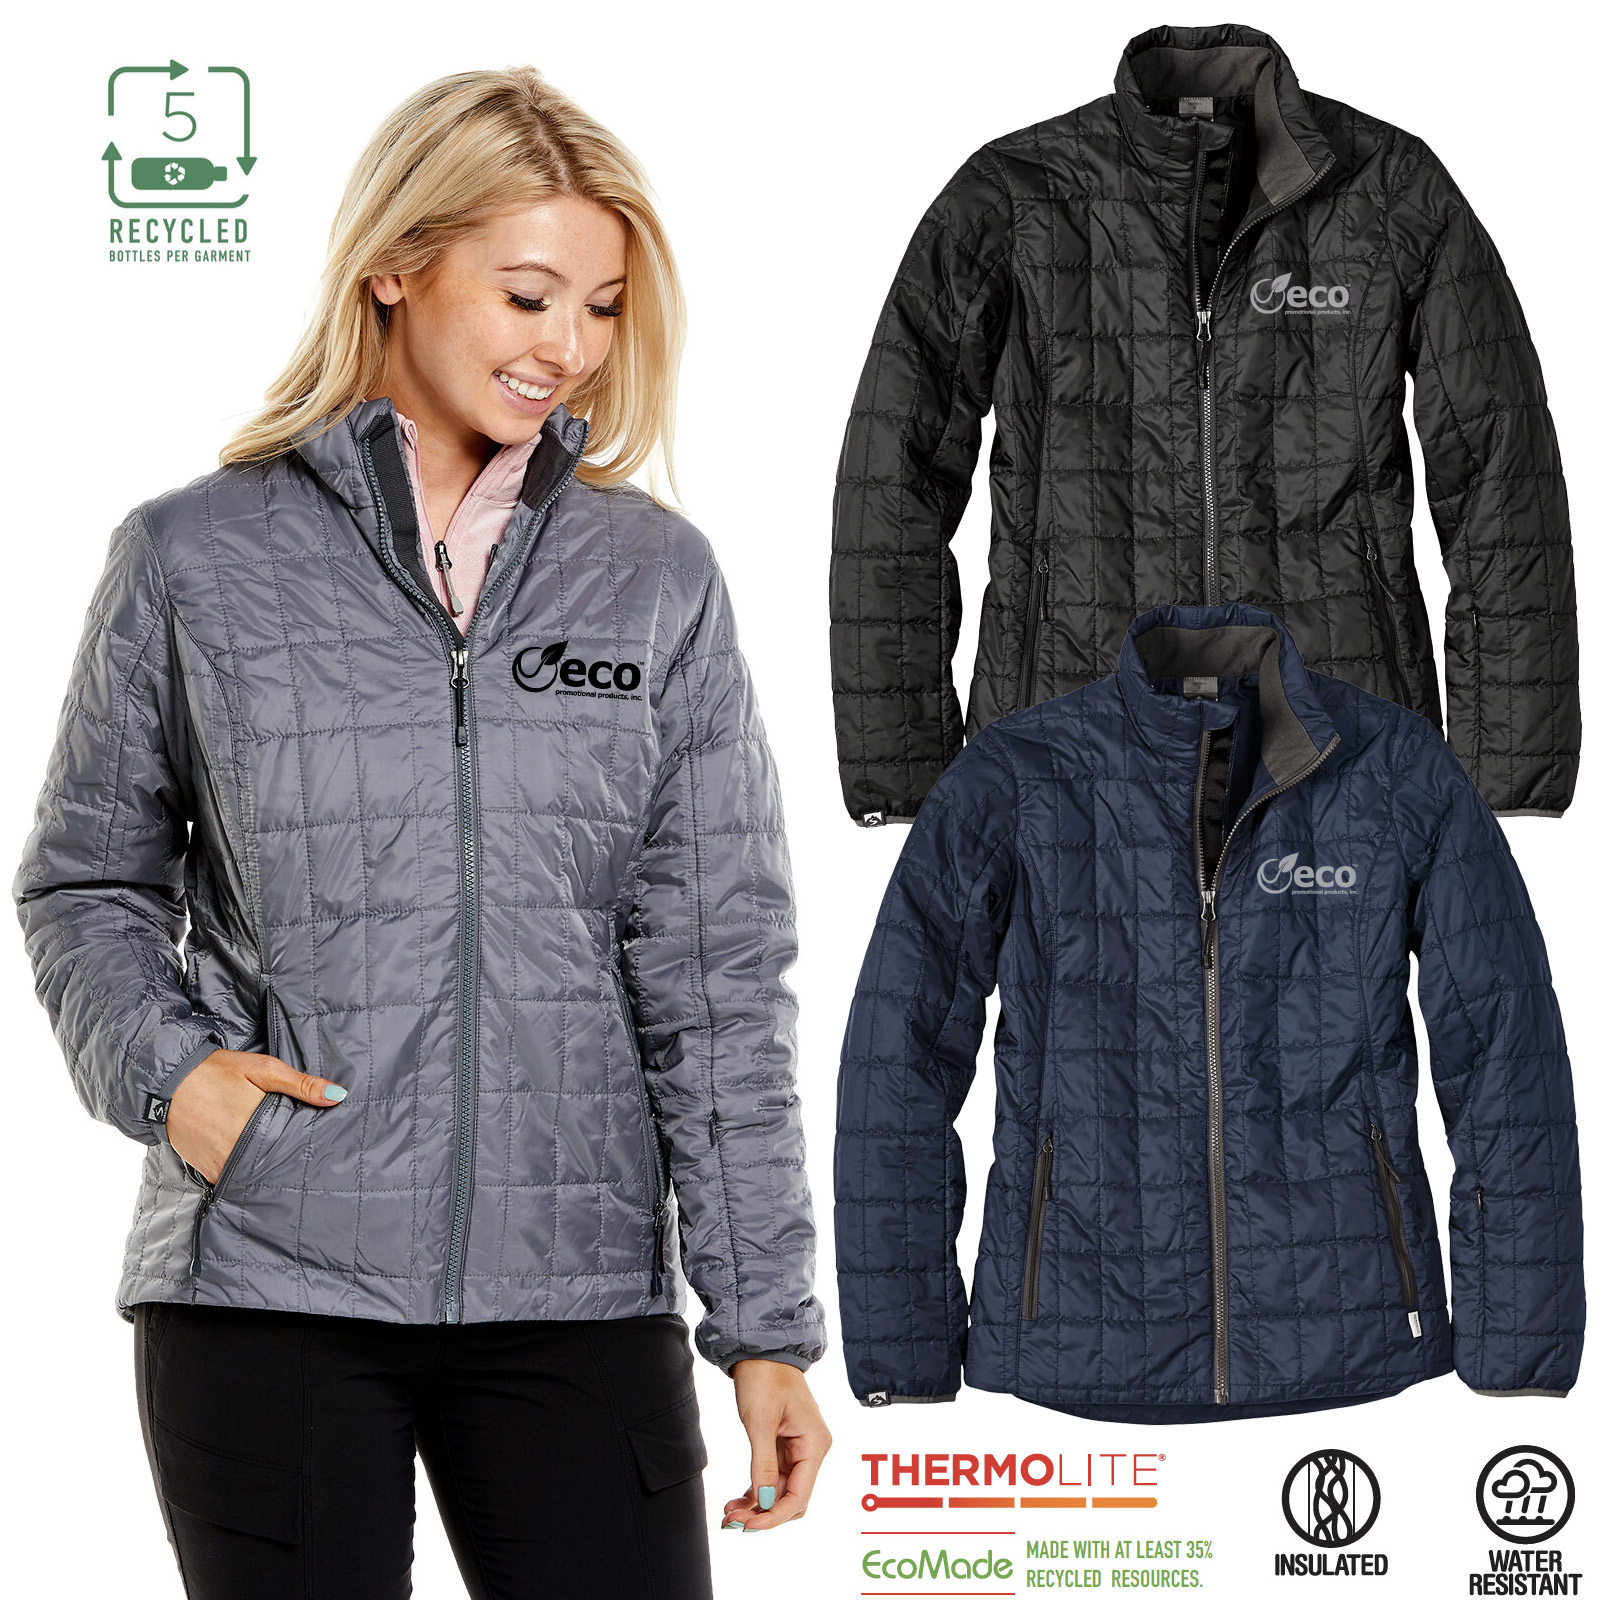 Recycled Insulated Travel Pack Jacket | Women's Fit